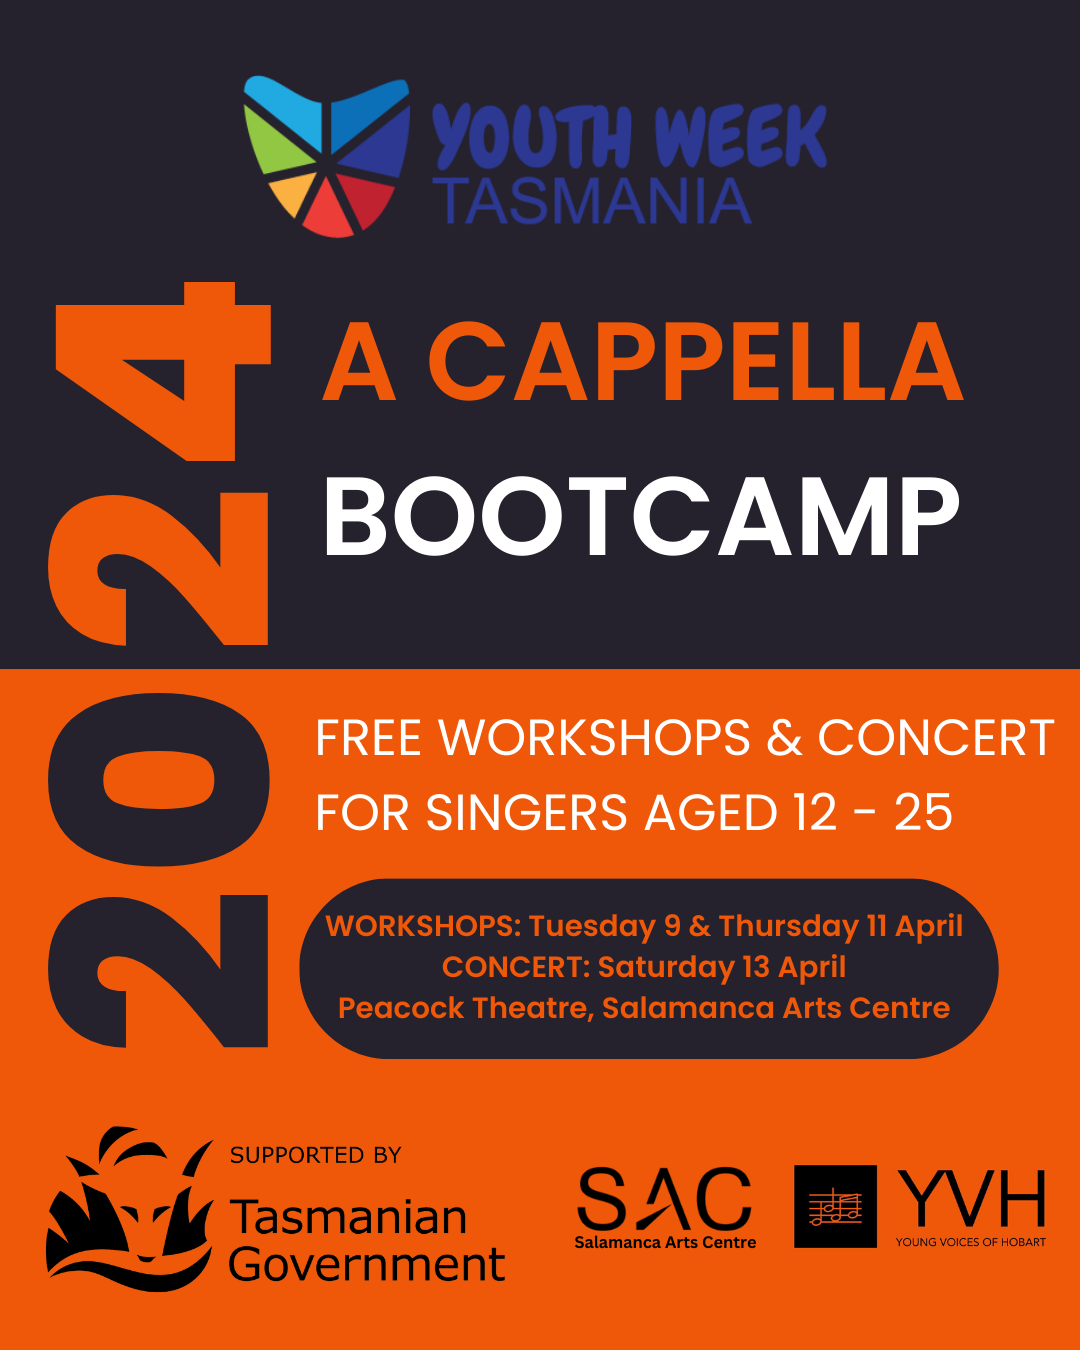 Youth Week 'A Cappella Bootcamp' Concert